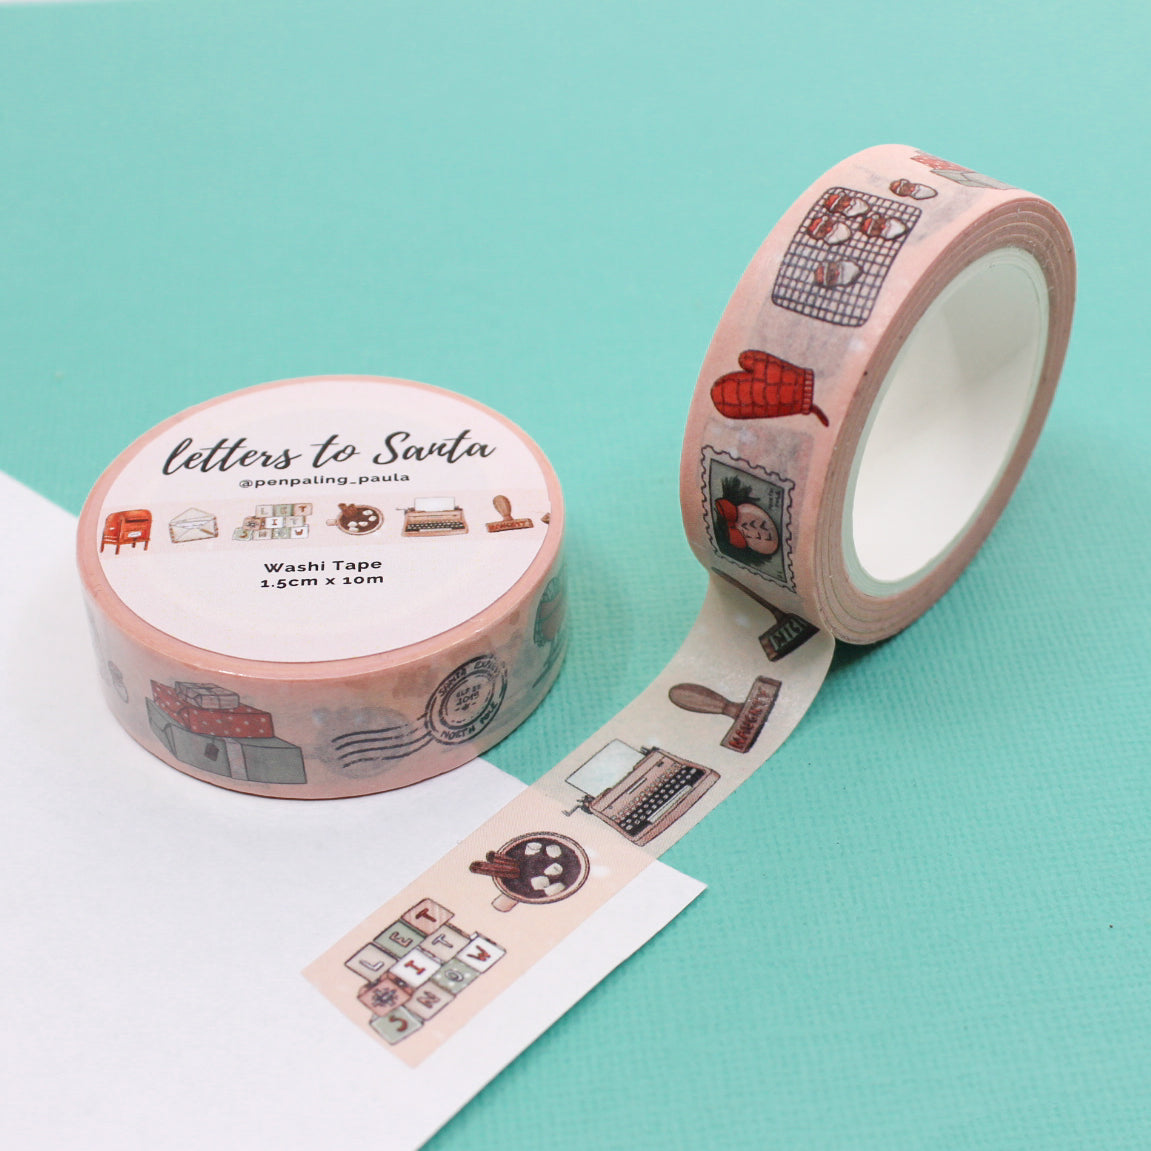 Letters to Santa Holiday Objects Washi Tape, a festive collection featuring whimsical illustrations of letters, gifts, and other holiday elements, perfect for adding a joyful touch to your seasonal crafts. This tape is from Pen Paling Paula and sold at BBB Supplies Craft Shop.